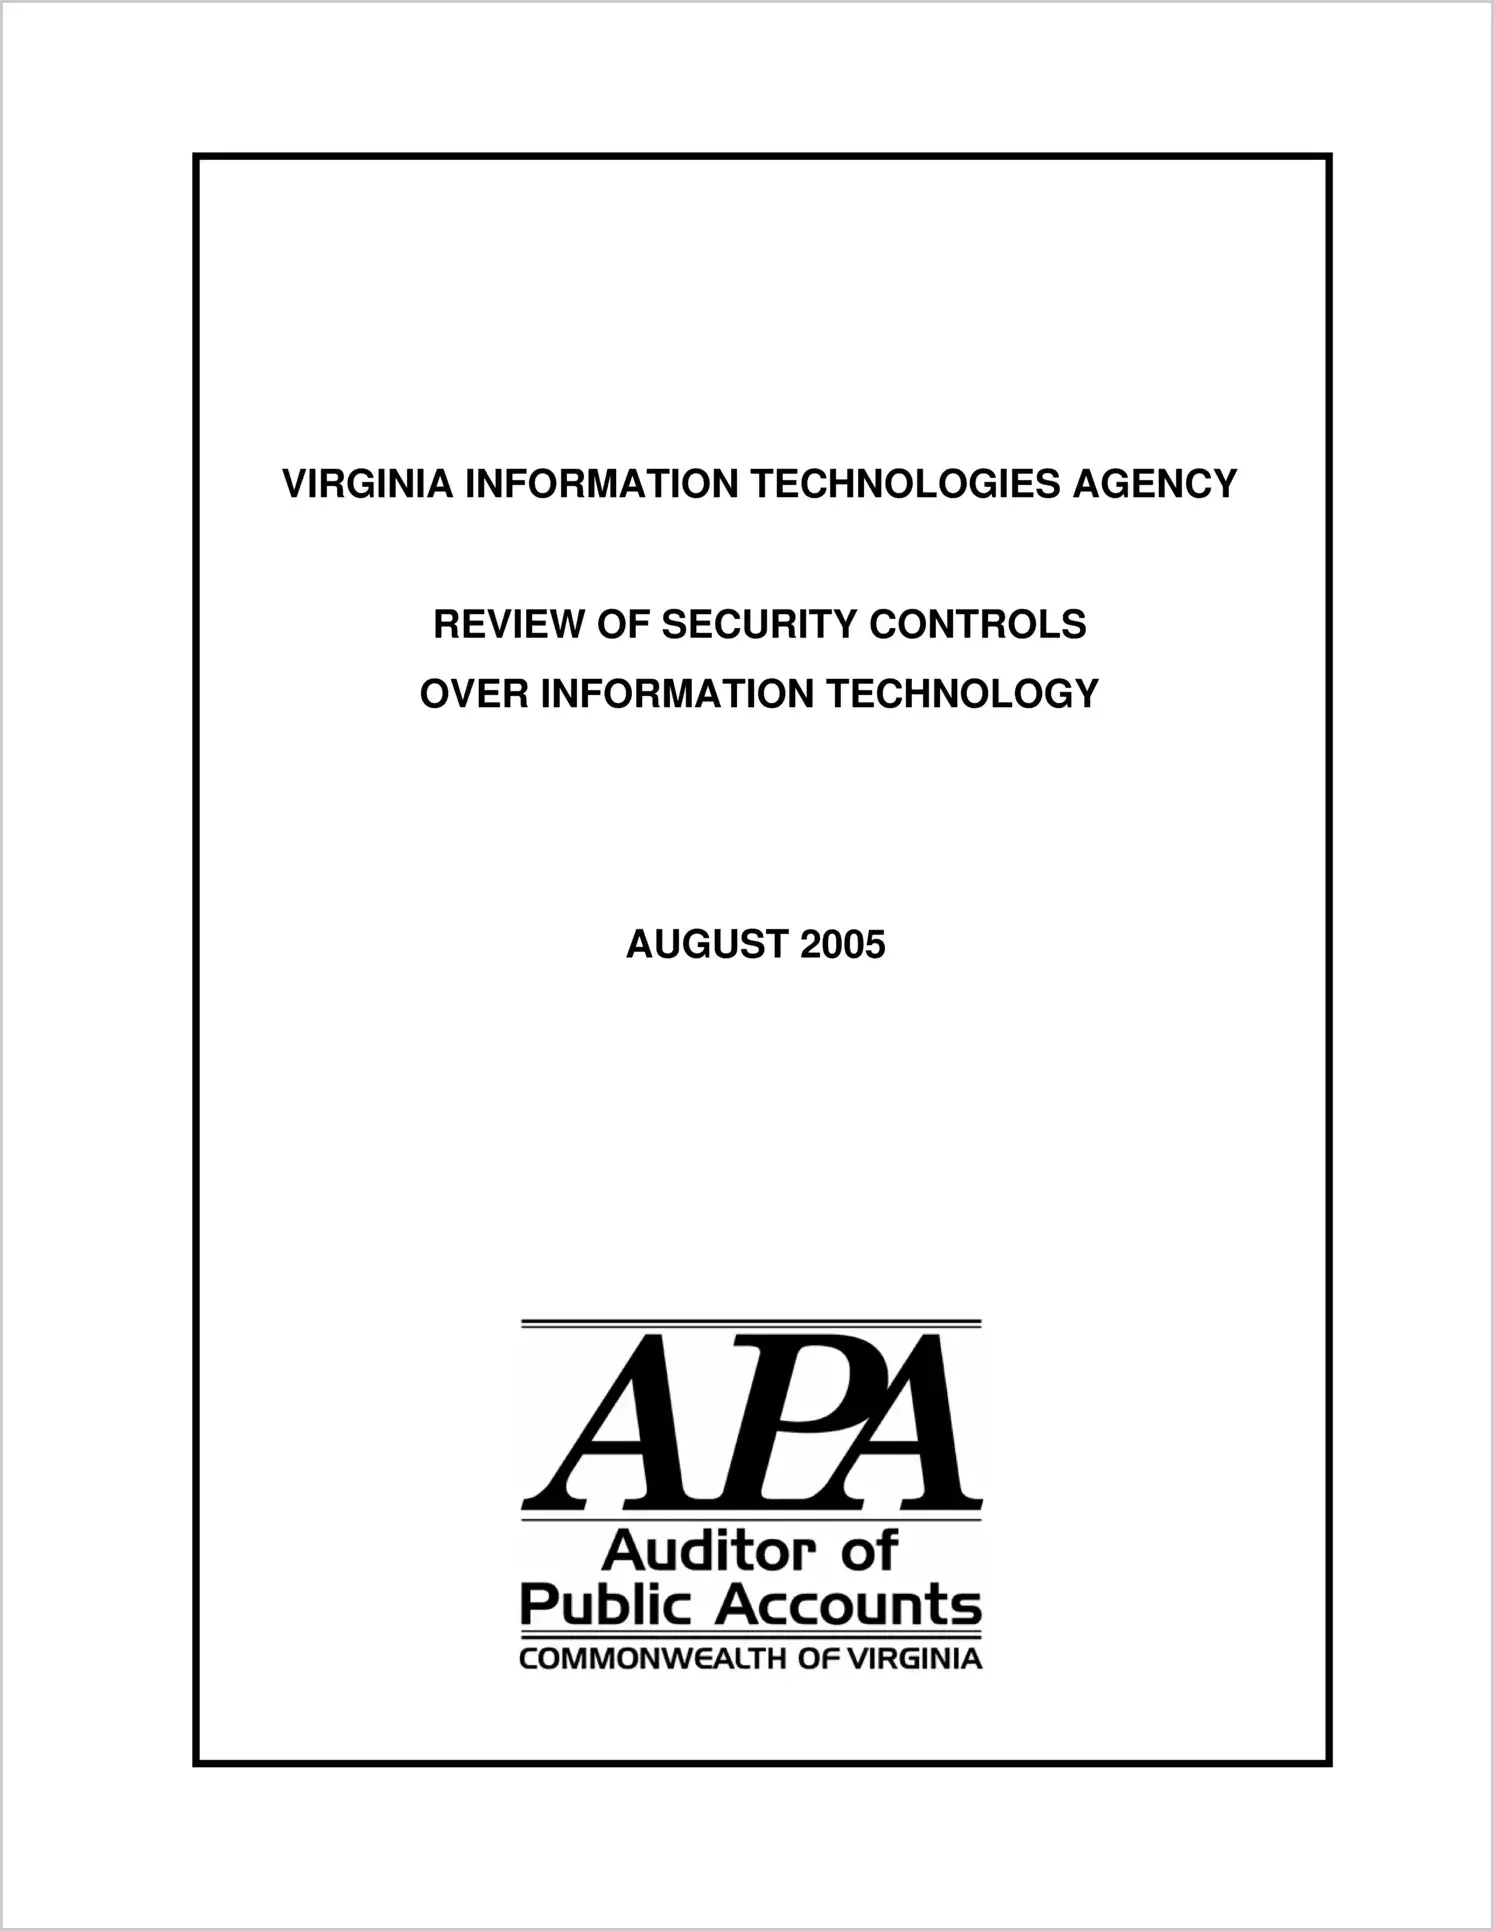 Special ReportVirginia Information Technologies Agencies Review of Security Controls over Information Technology (Report Date: 8/2005)